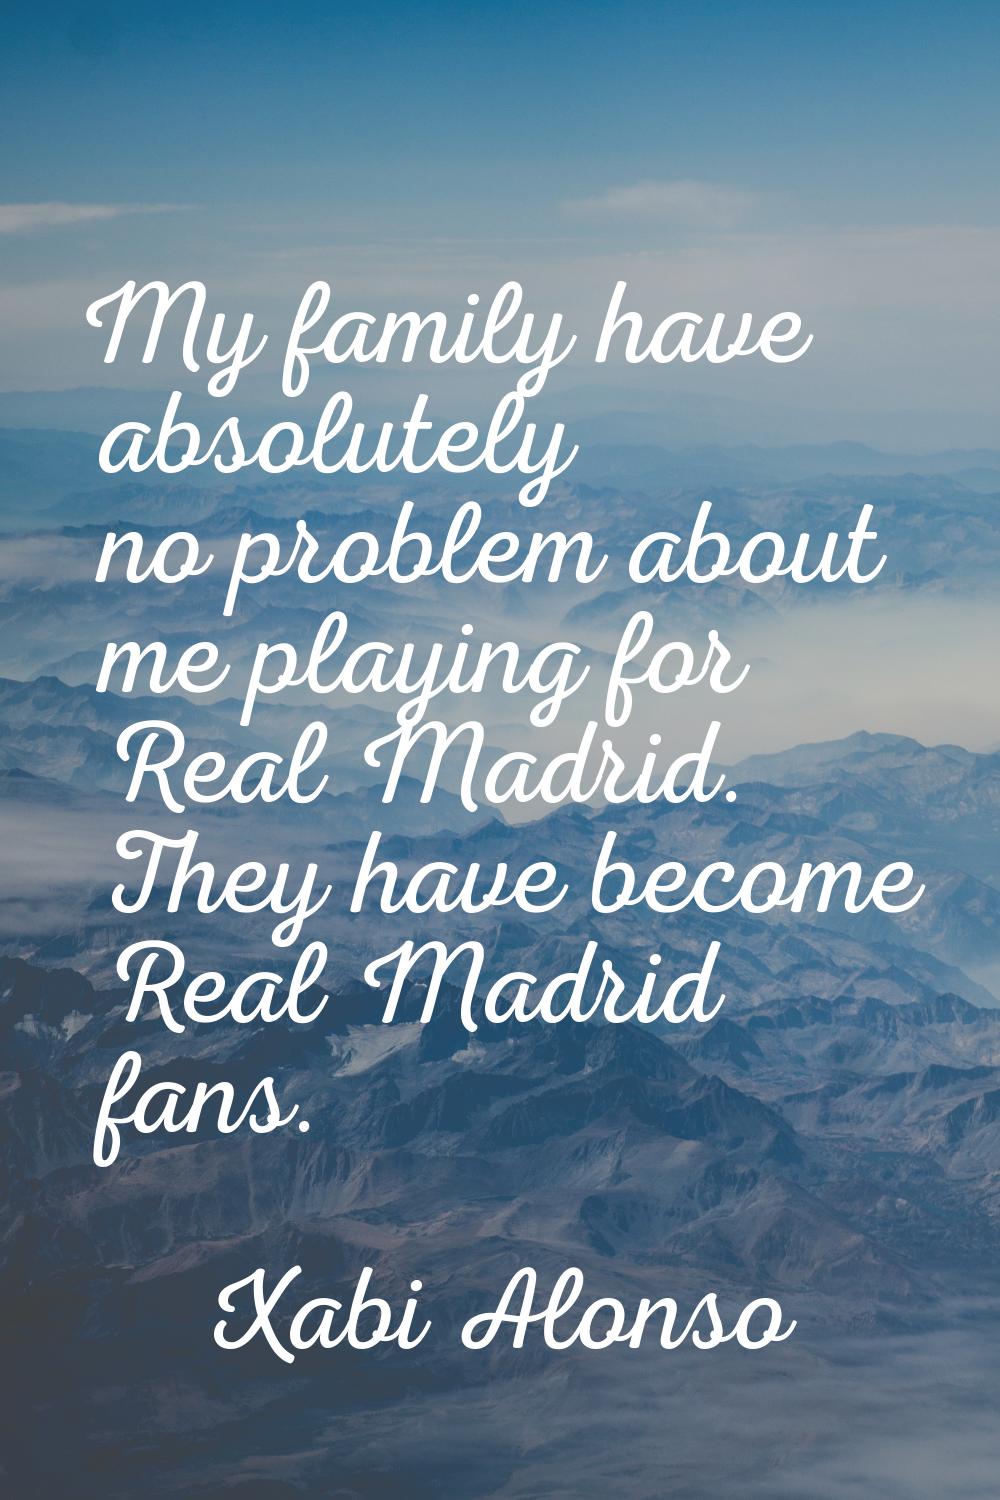 My family have absolutely no problem about me playing for Real Madrid. They have become Real Madrid